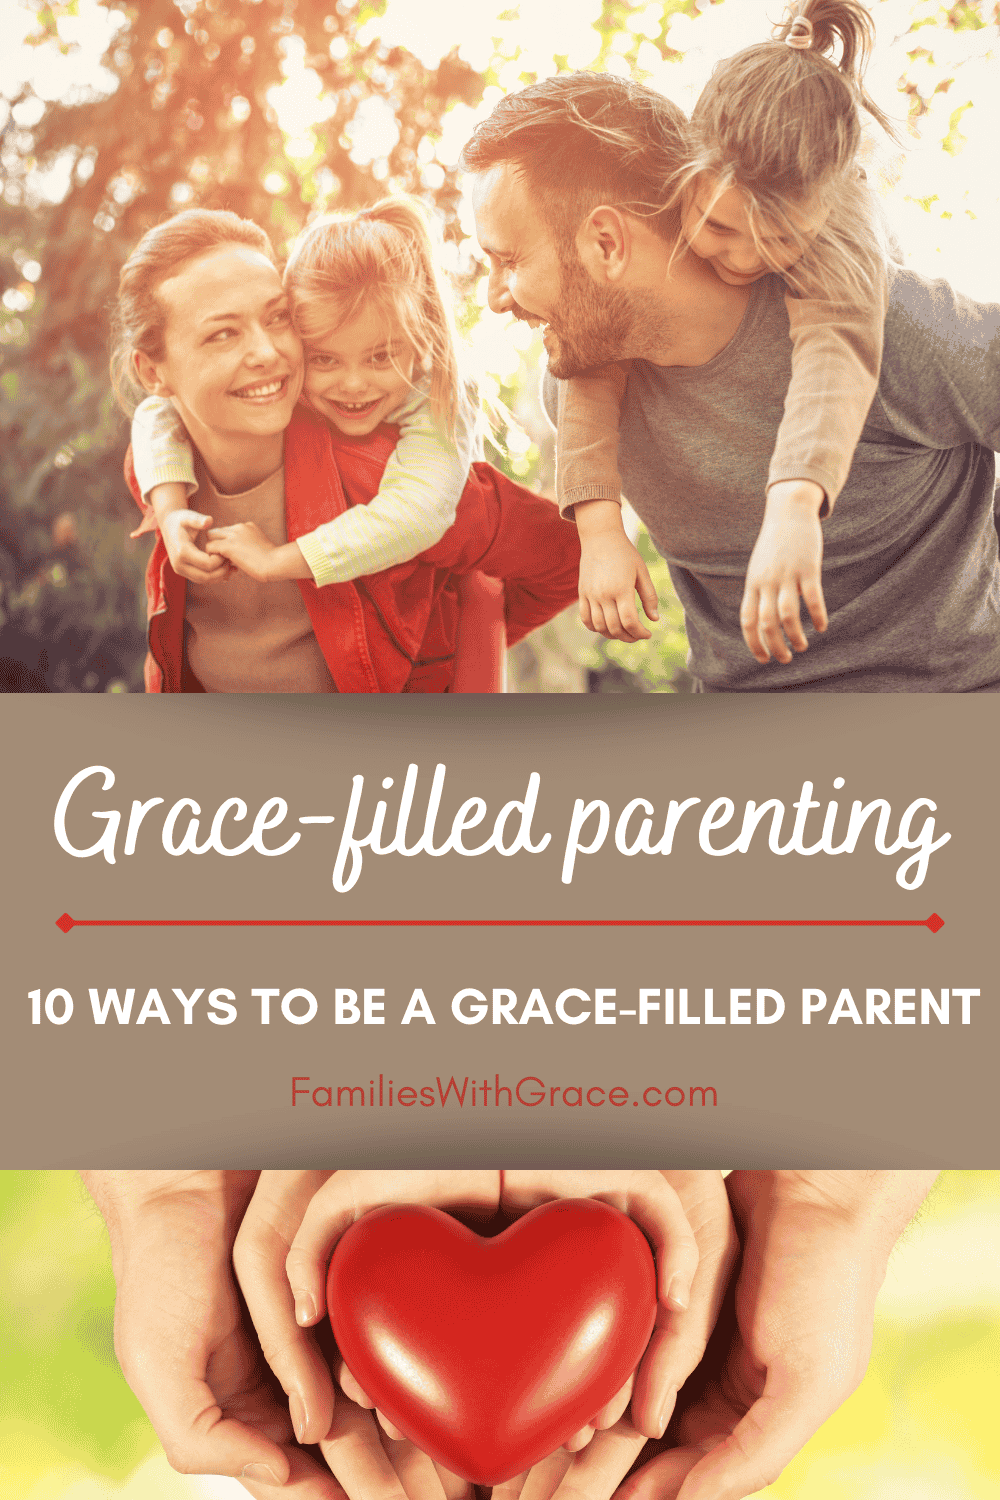 Being a grace-filled parent